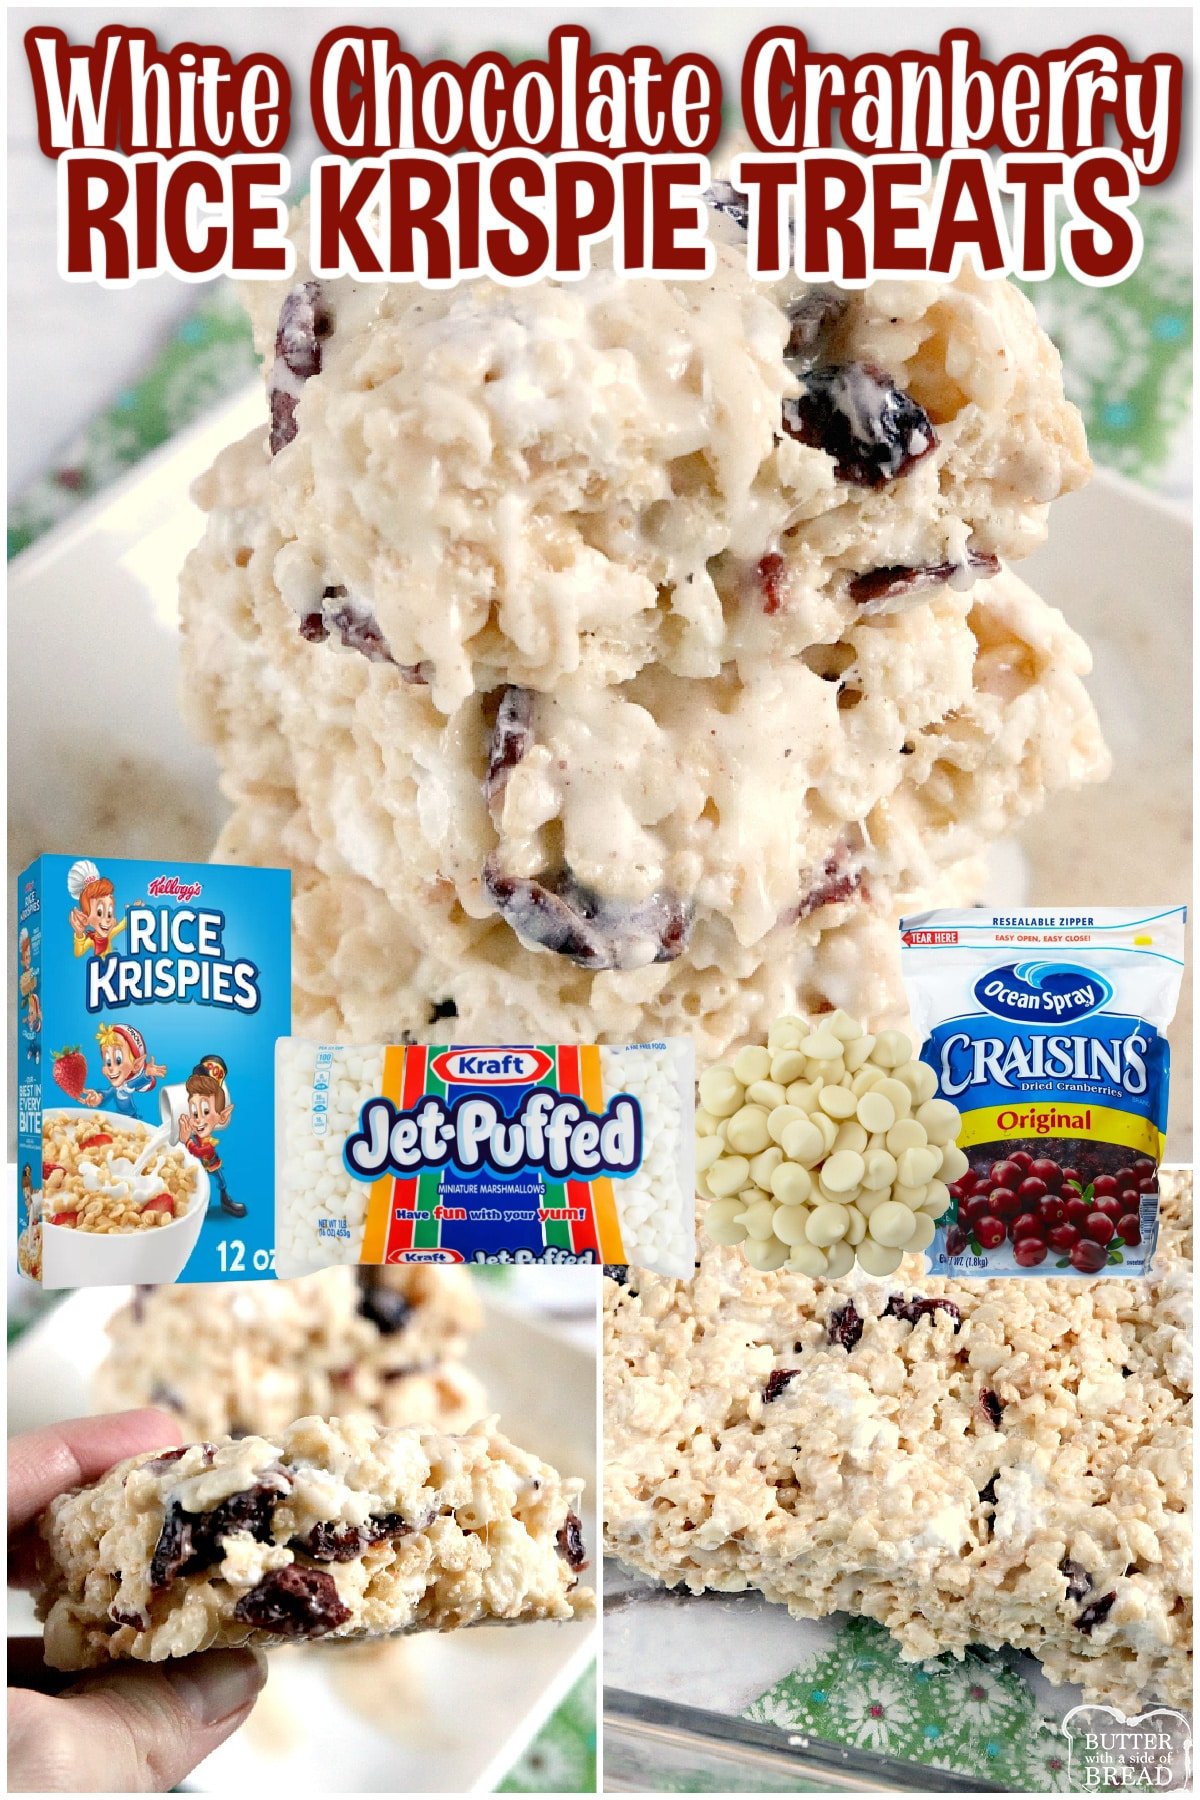 White Chocolate Cranberry Rice Krispie Treats are full of marshmallows, dried cranberries and white chocolate chips. This rice krispie treat recipe is topped with a simple, spiced vanilla glaze to make them even more delicious!